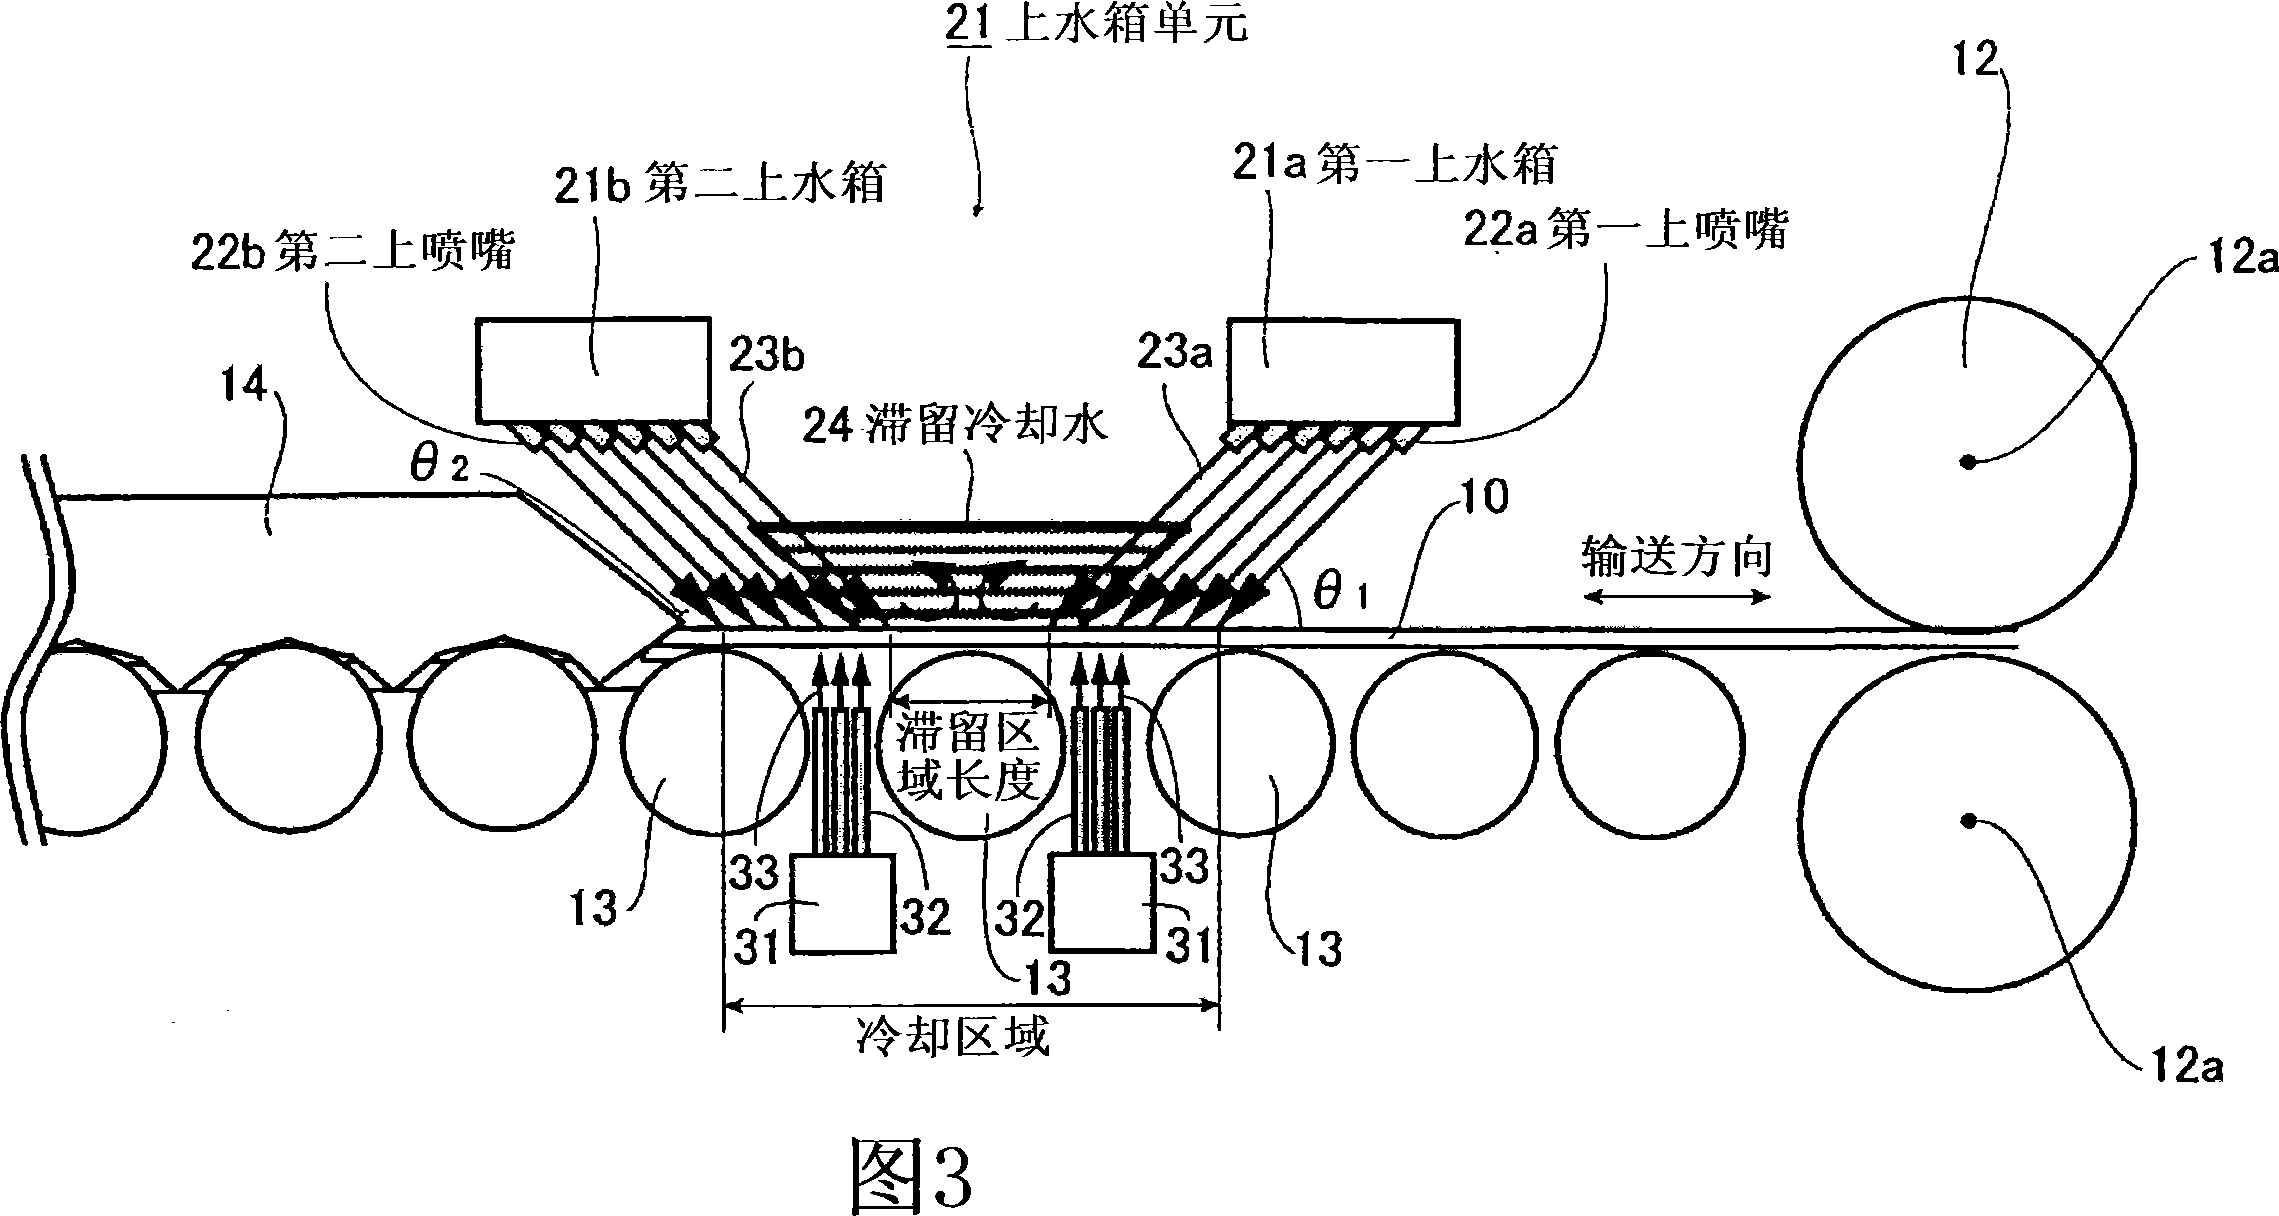 Cooling facility and cooling method of steel plate